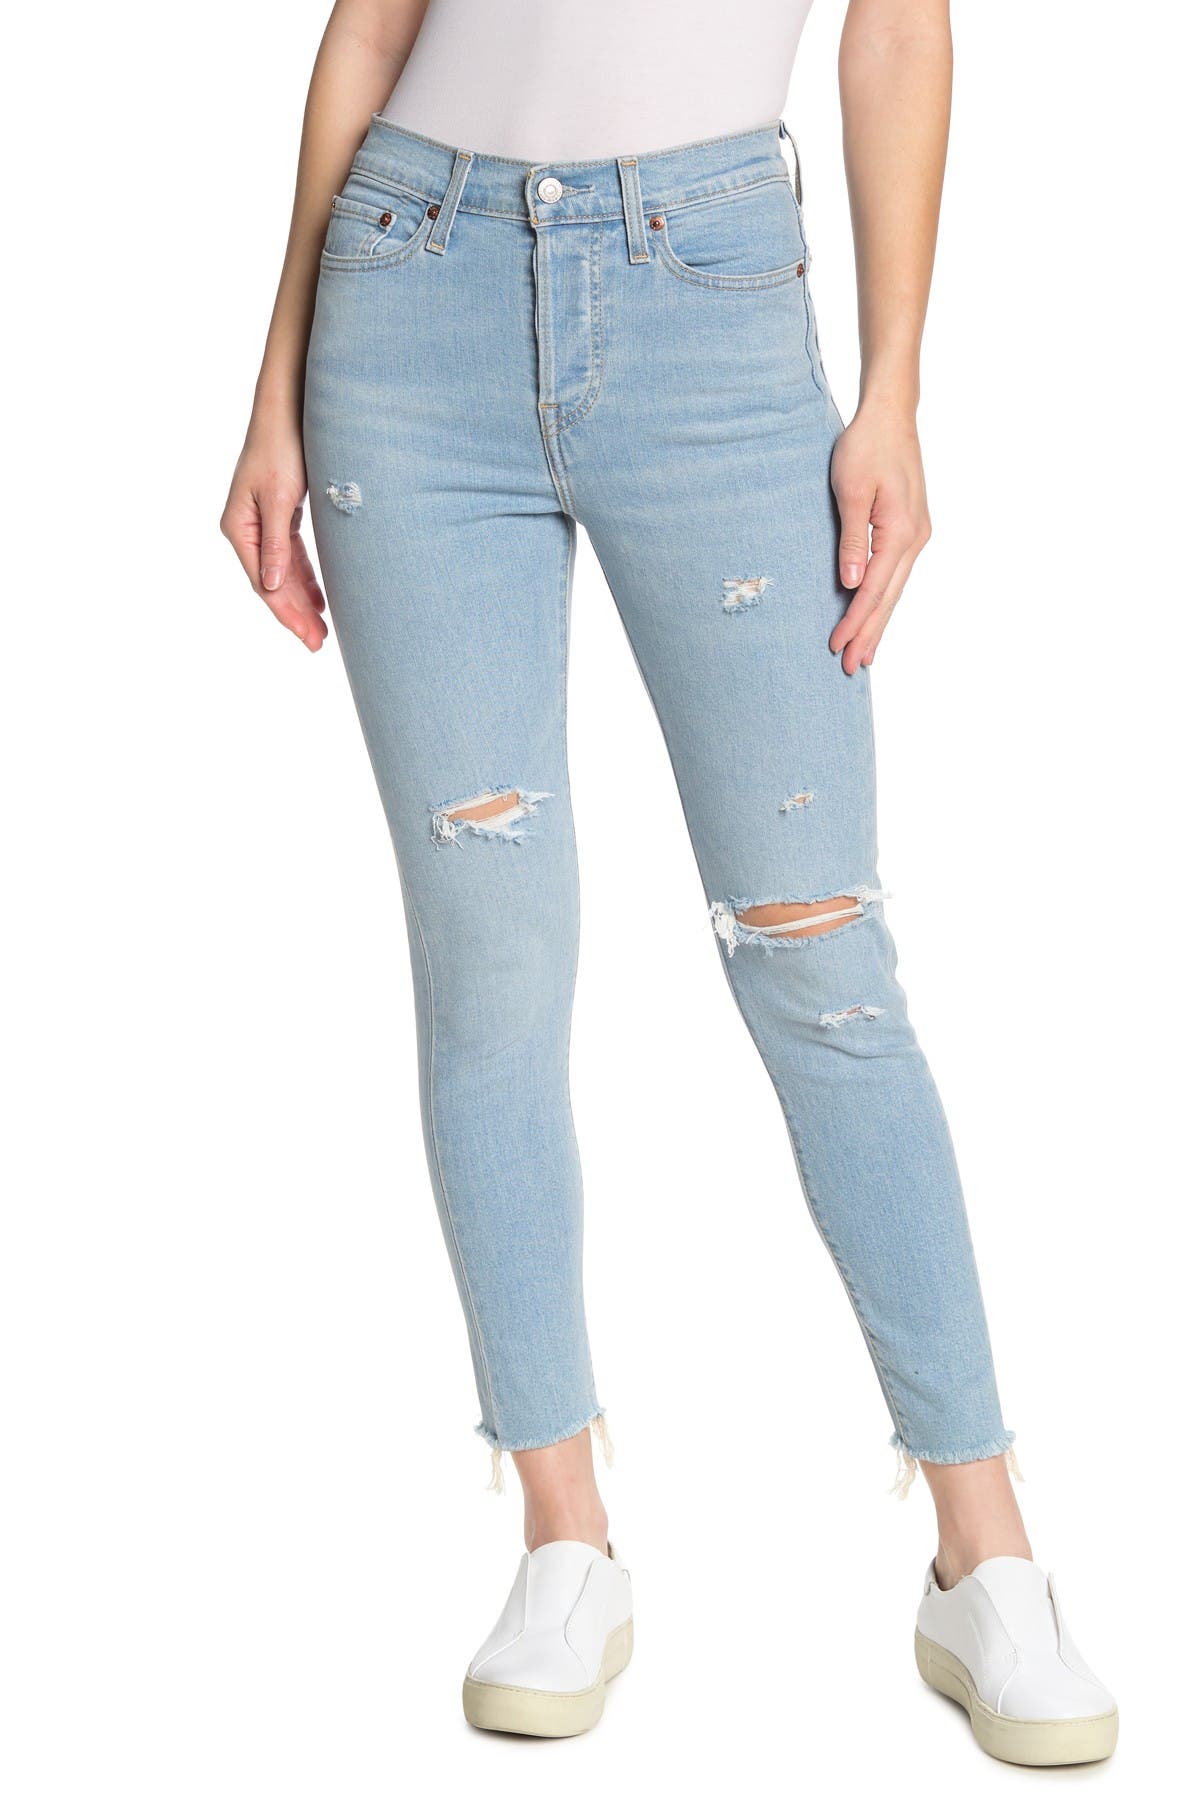 levi's wedgie skinny ankle jeans